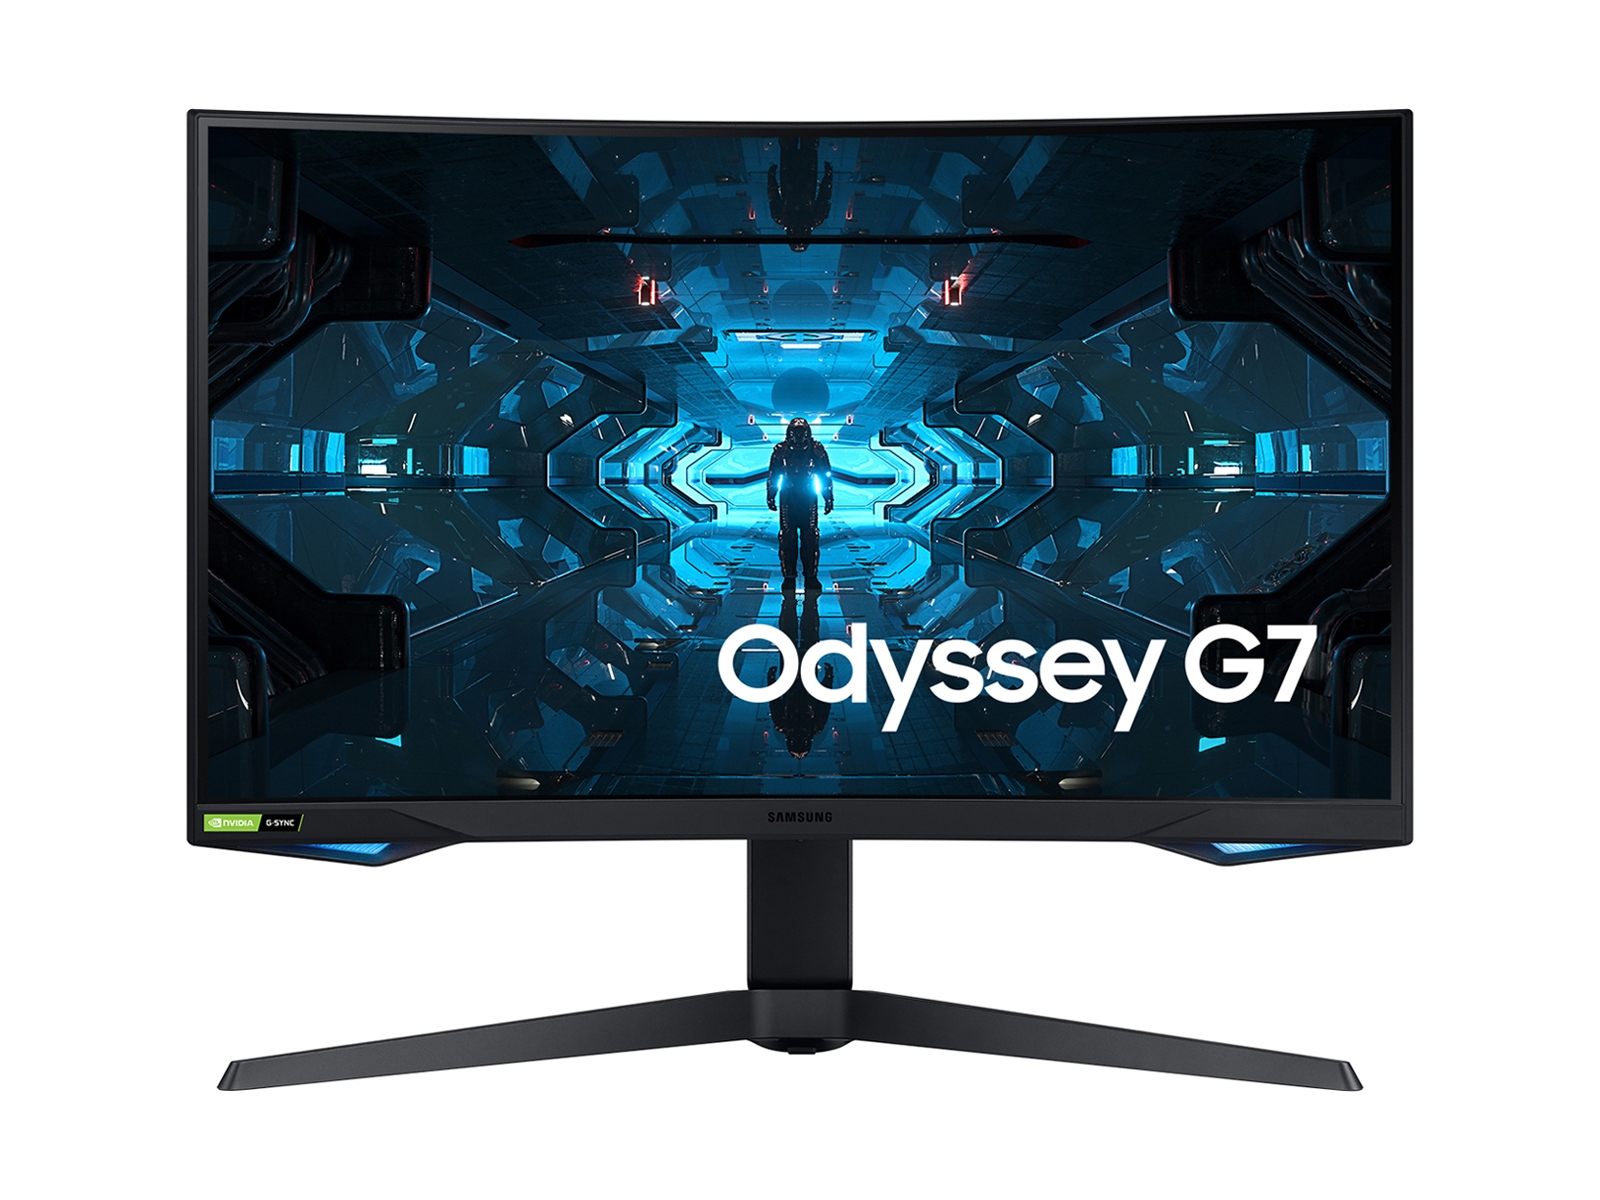  SAMSUNG 32 Odyssey Neo G7 4K UHD 165Hz 1ms G-Sync 1000R Curved  Gaming Monitor, Quantum HDR2000, AMD FreeSync Premium Pro, Ultrawide Game  View, DisplayPort, HDMI, Height Adjustable Stand, Black, 2022 